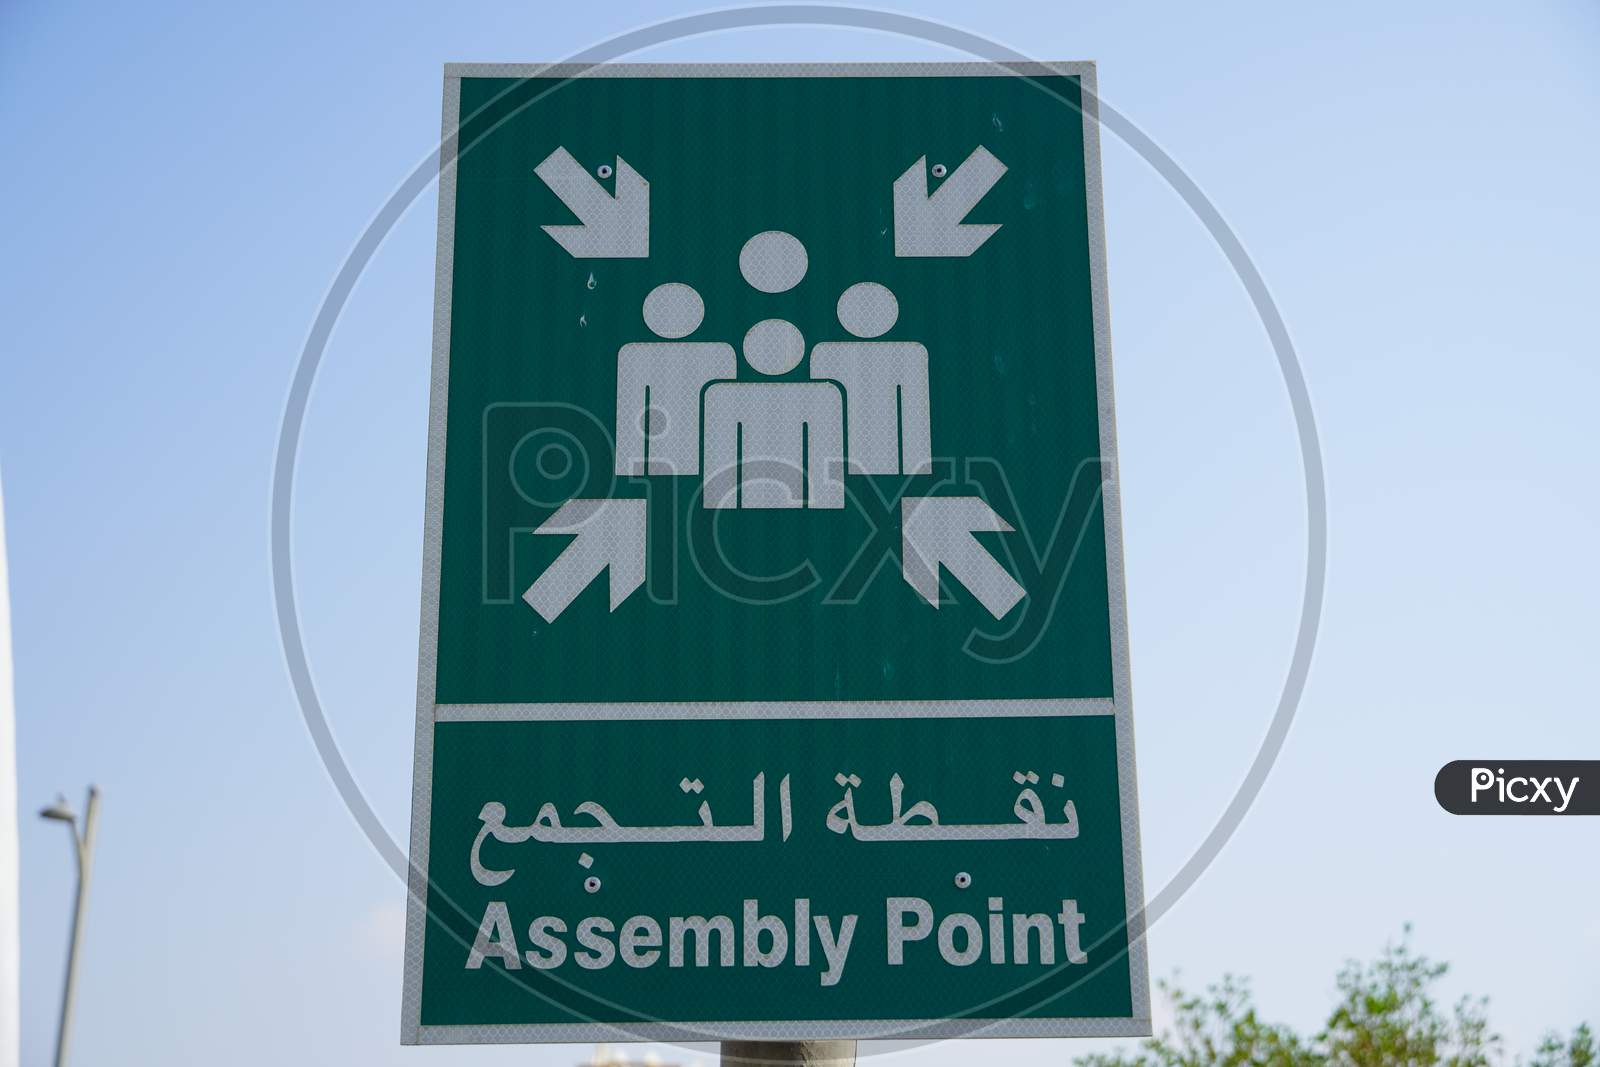 Emergency Assembly Point Information Sign In White Paint On Green Background Fixed To A Pole To Direct People Where To Go In Case Of An Emergency.